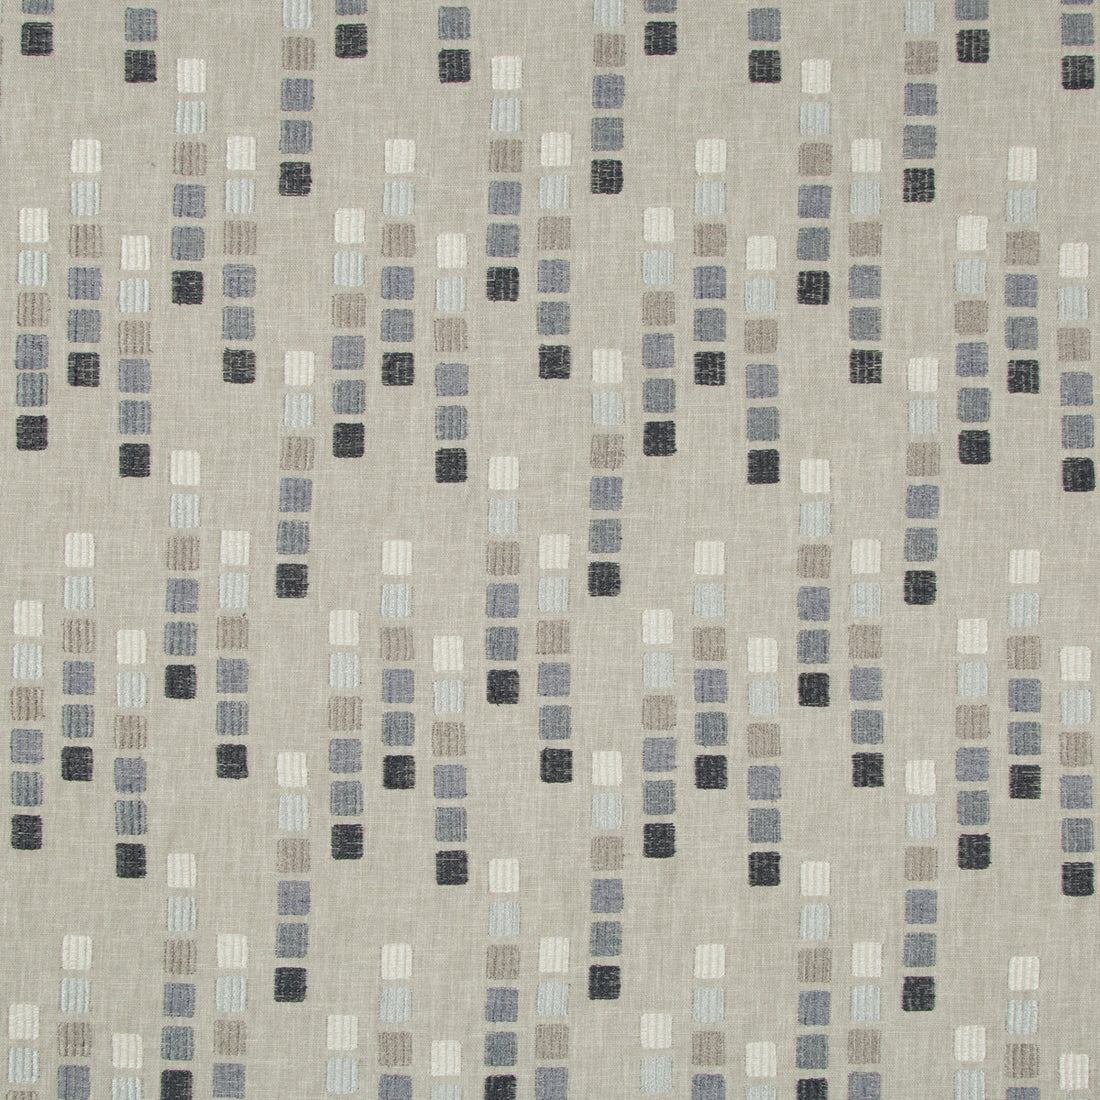 Slipstream fabric in graphite color - pattern 34848.511.0 - by Kravet Basics in the Thom Filicia Altitude collection